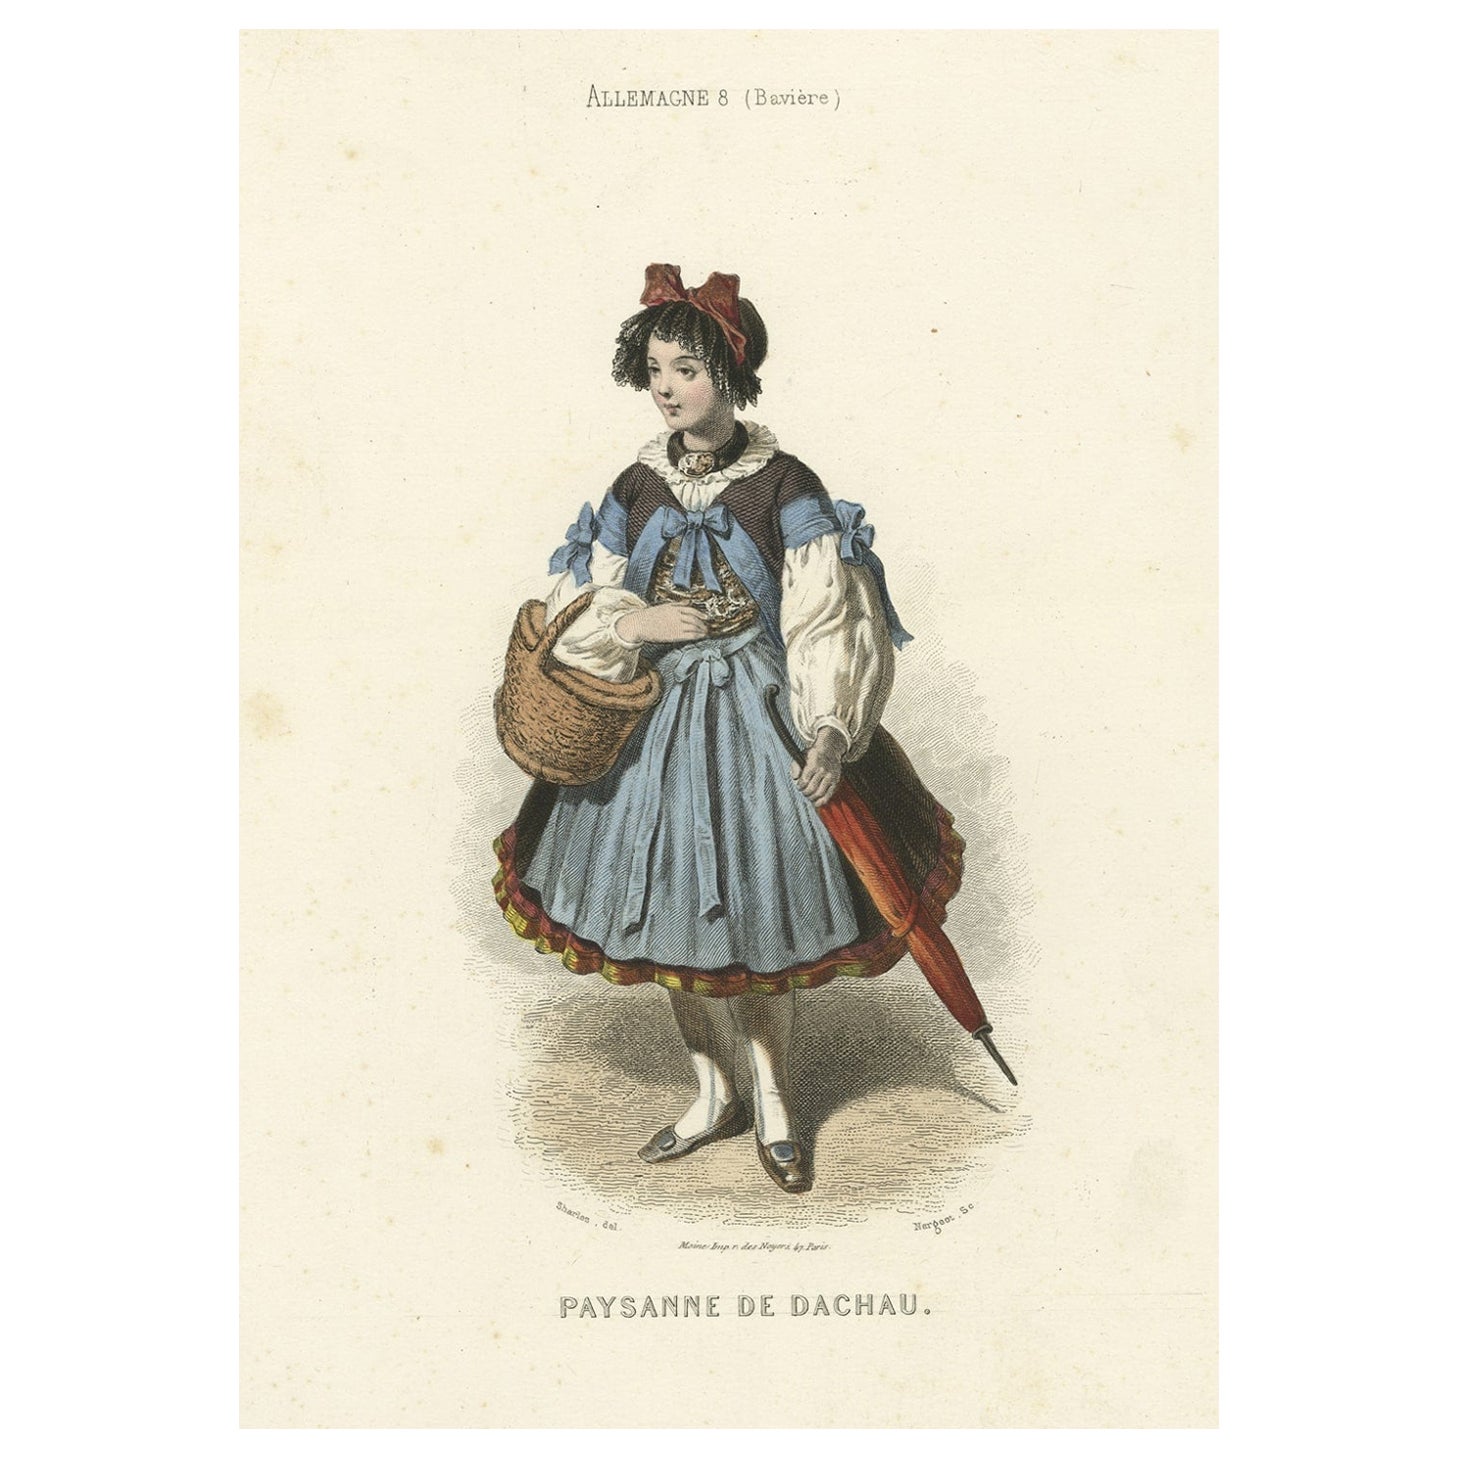 Antique Print of a Peasant Woman from Dachau Near München in Germany, 1850